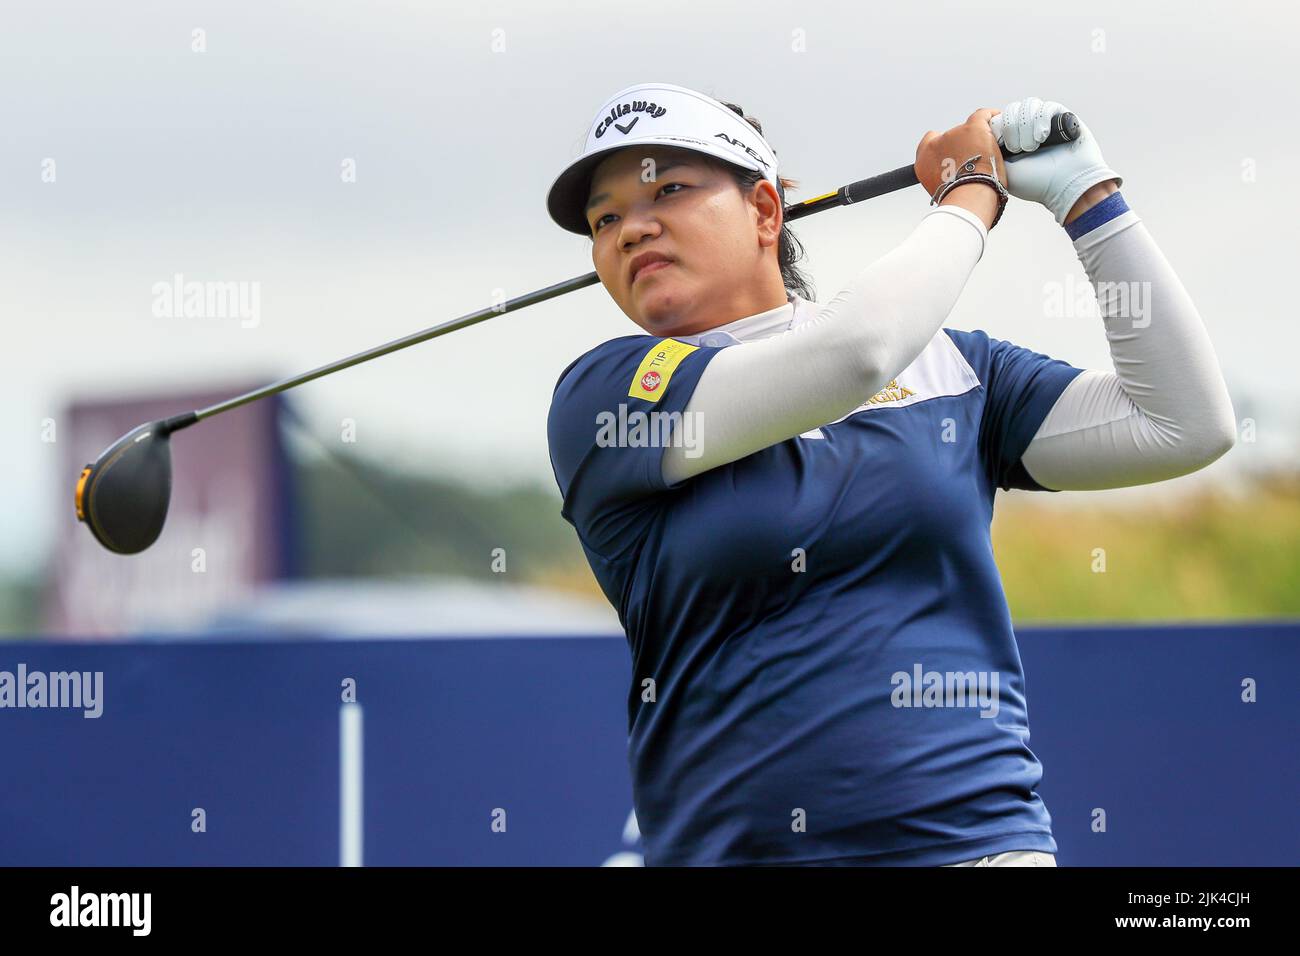 Irvine, UK. 30th July, 2022. The third round of the Trust Golf Women's Scottish Golf took place with 75 players making the cut. Heavy overnight rain from Friday into Saturday made for a softer and more testing course. Wichanee Meechai teeing off at the 12th. Credit: Findlay/Alamy Live News Stock Photo